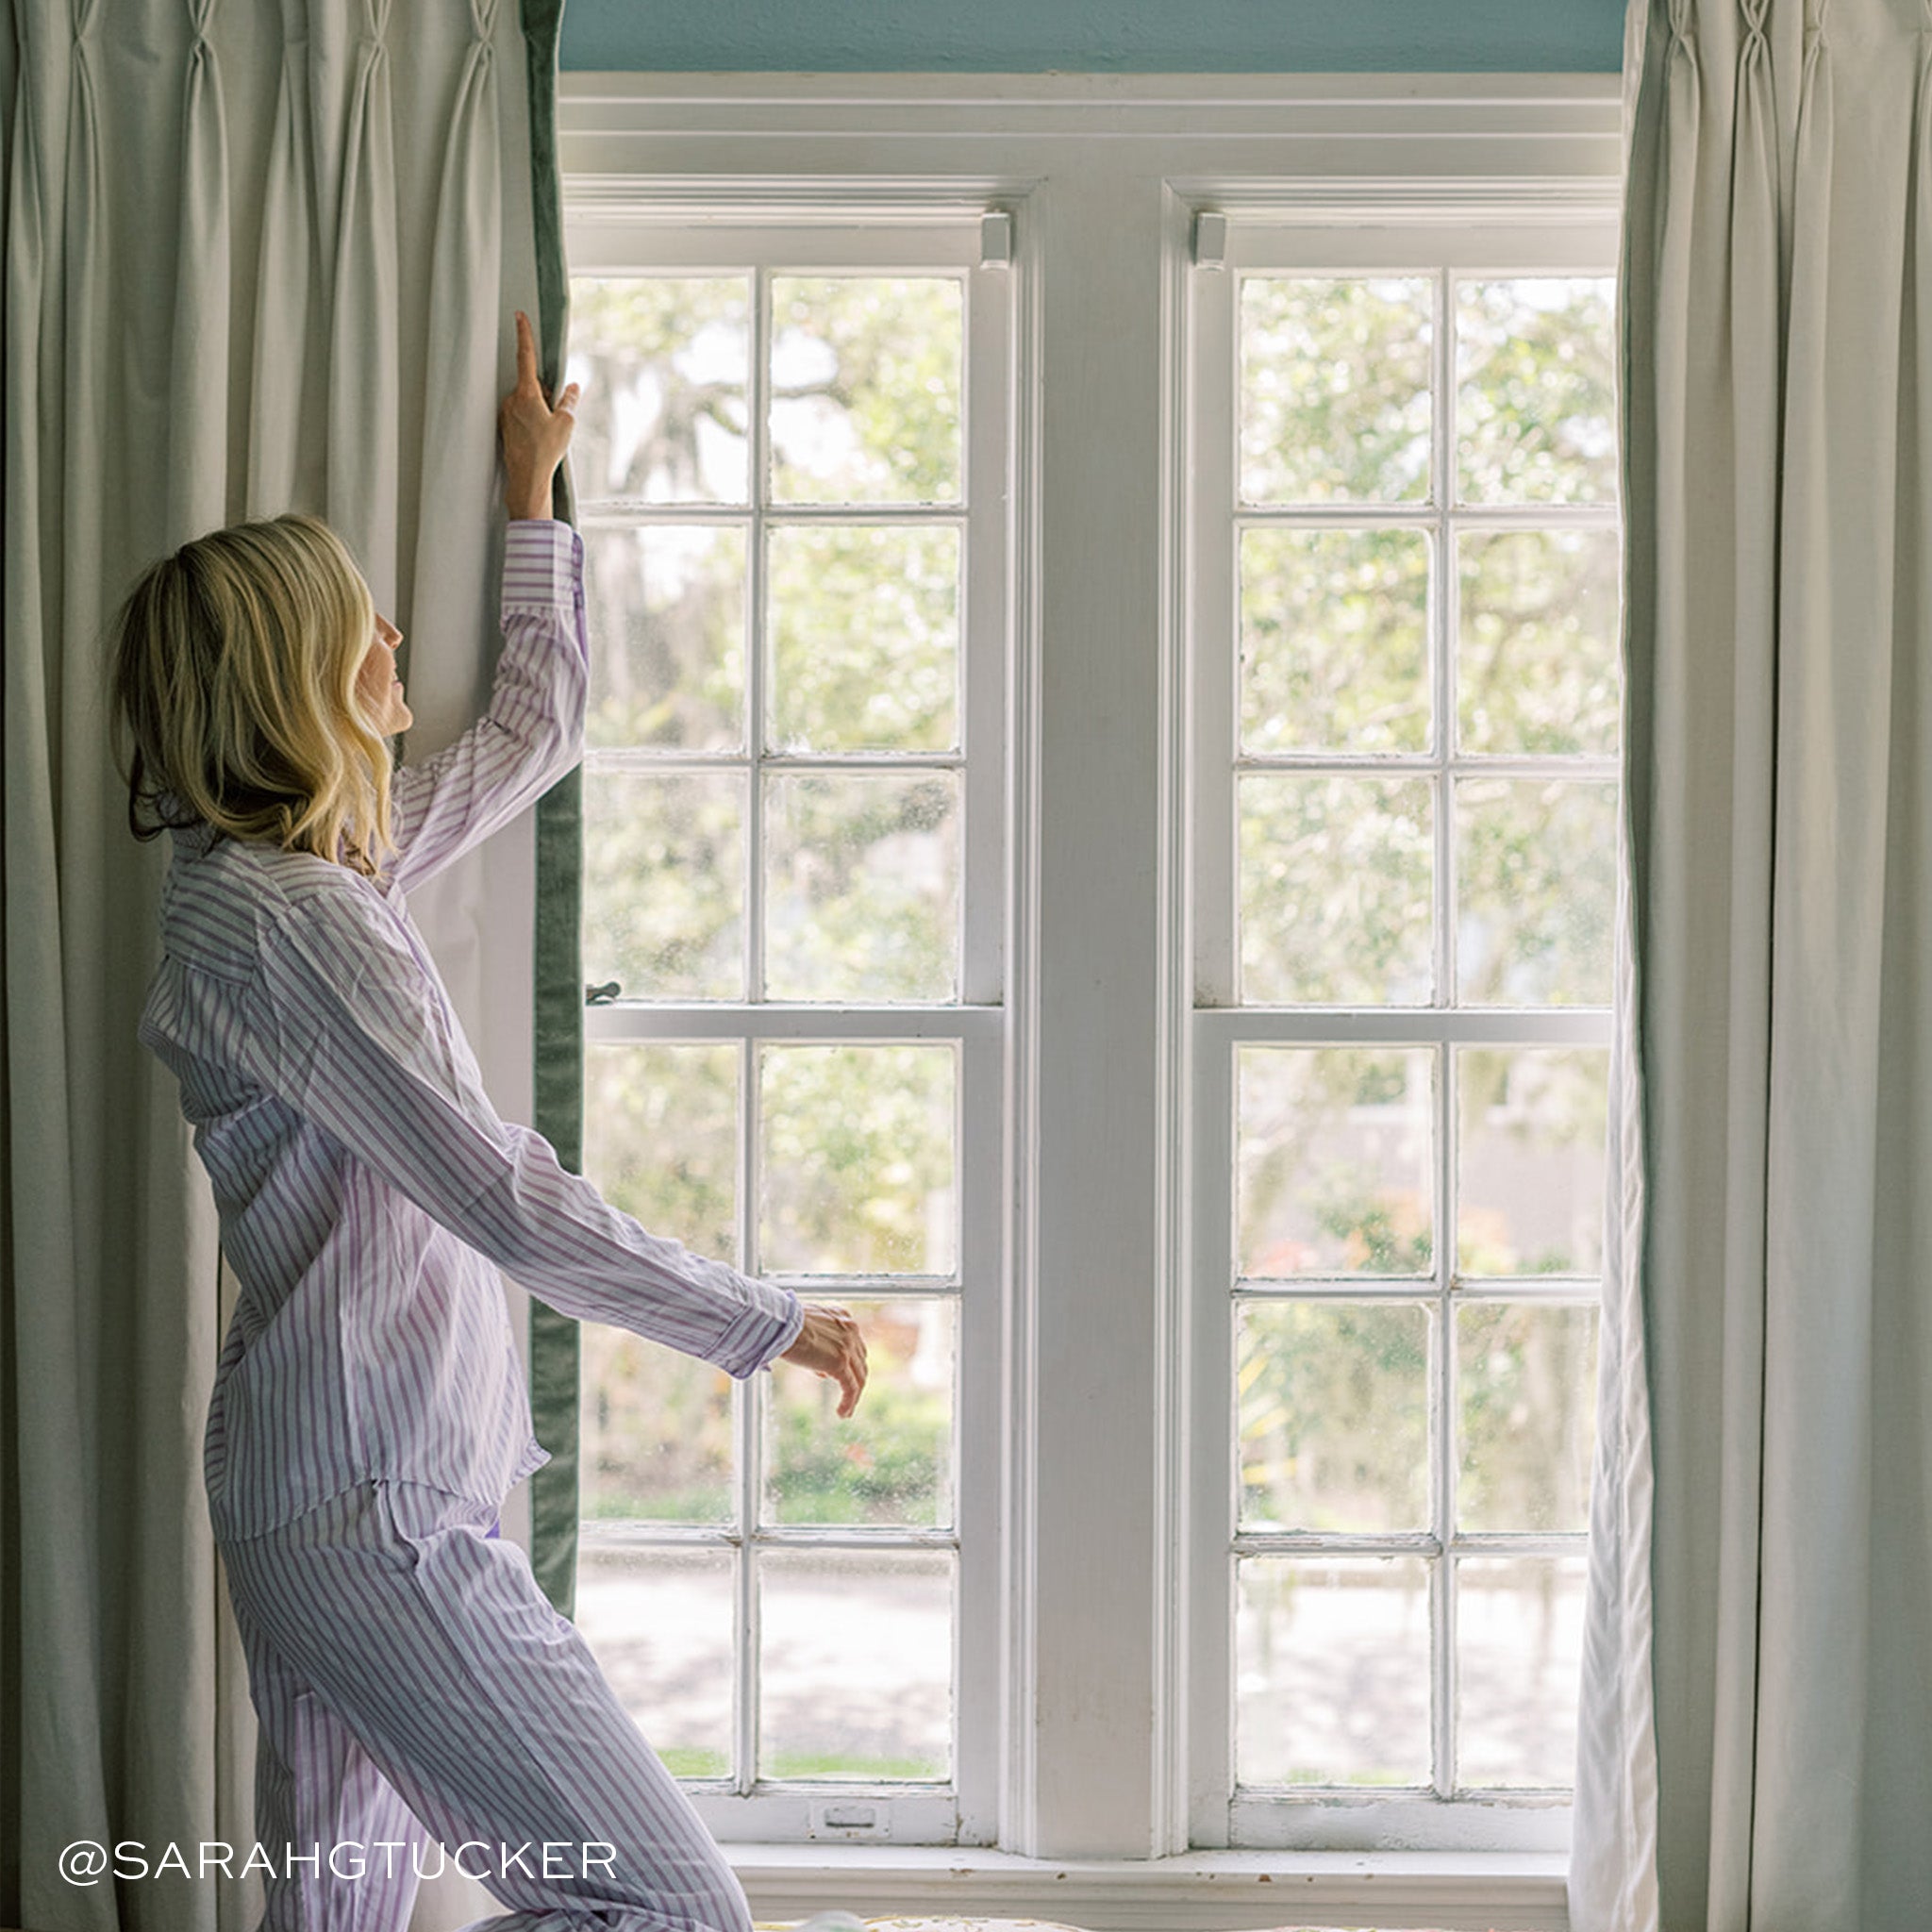 Illuminated window styled with Natural White Linen Curtains with Fern Green Velvet Band being held by blonde woman wearing stripped pajamas. Photo taken by Sarah G Tucker